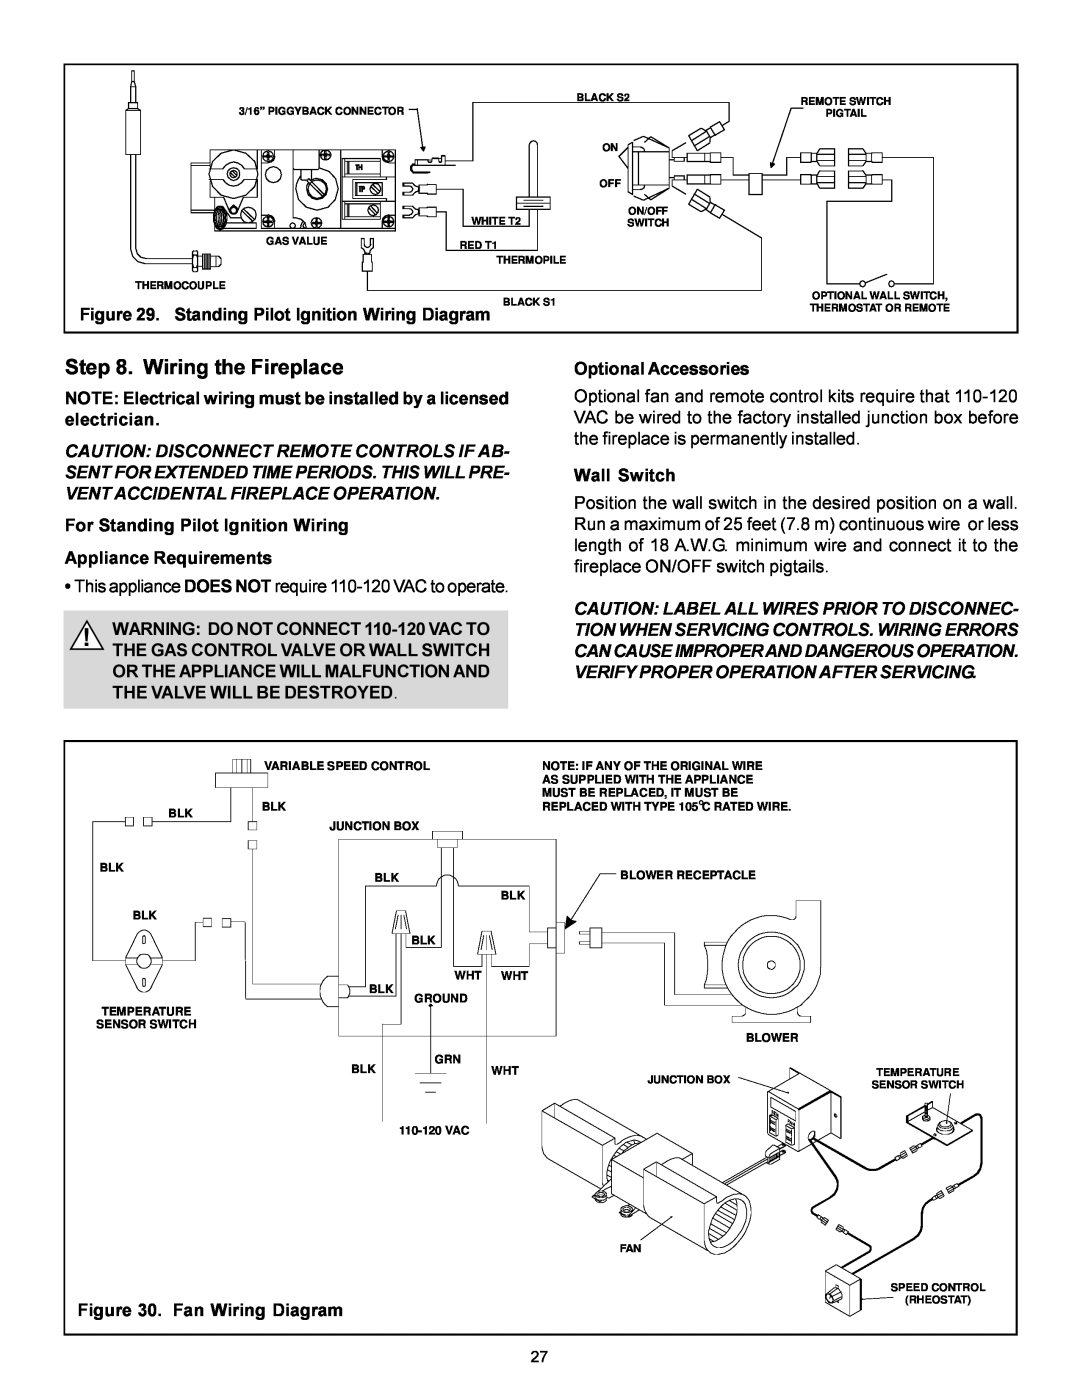 Heat & Glo LifeStyle BAY-38HV manual Wiring the Fireplace, Standing Pilot Ignition Wiring Diagram, Appliance Requirements 